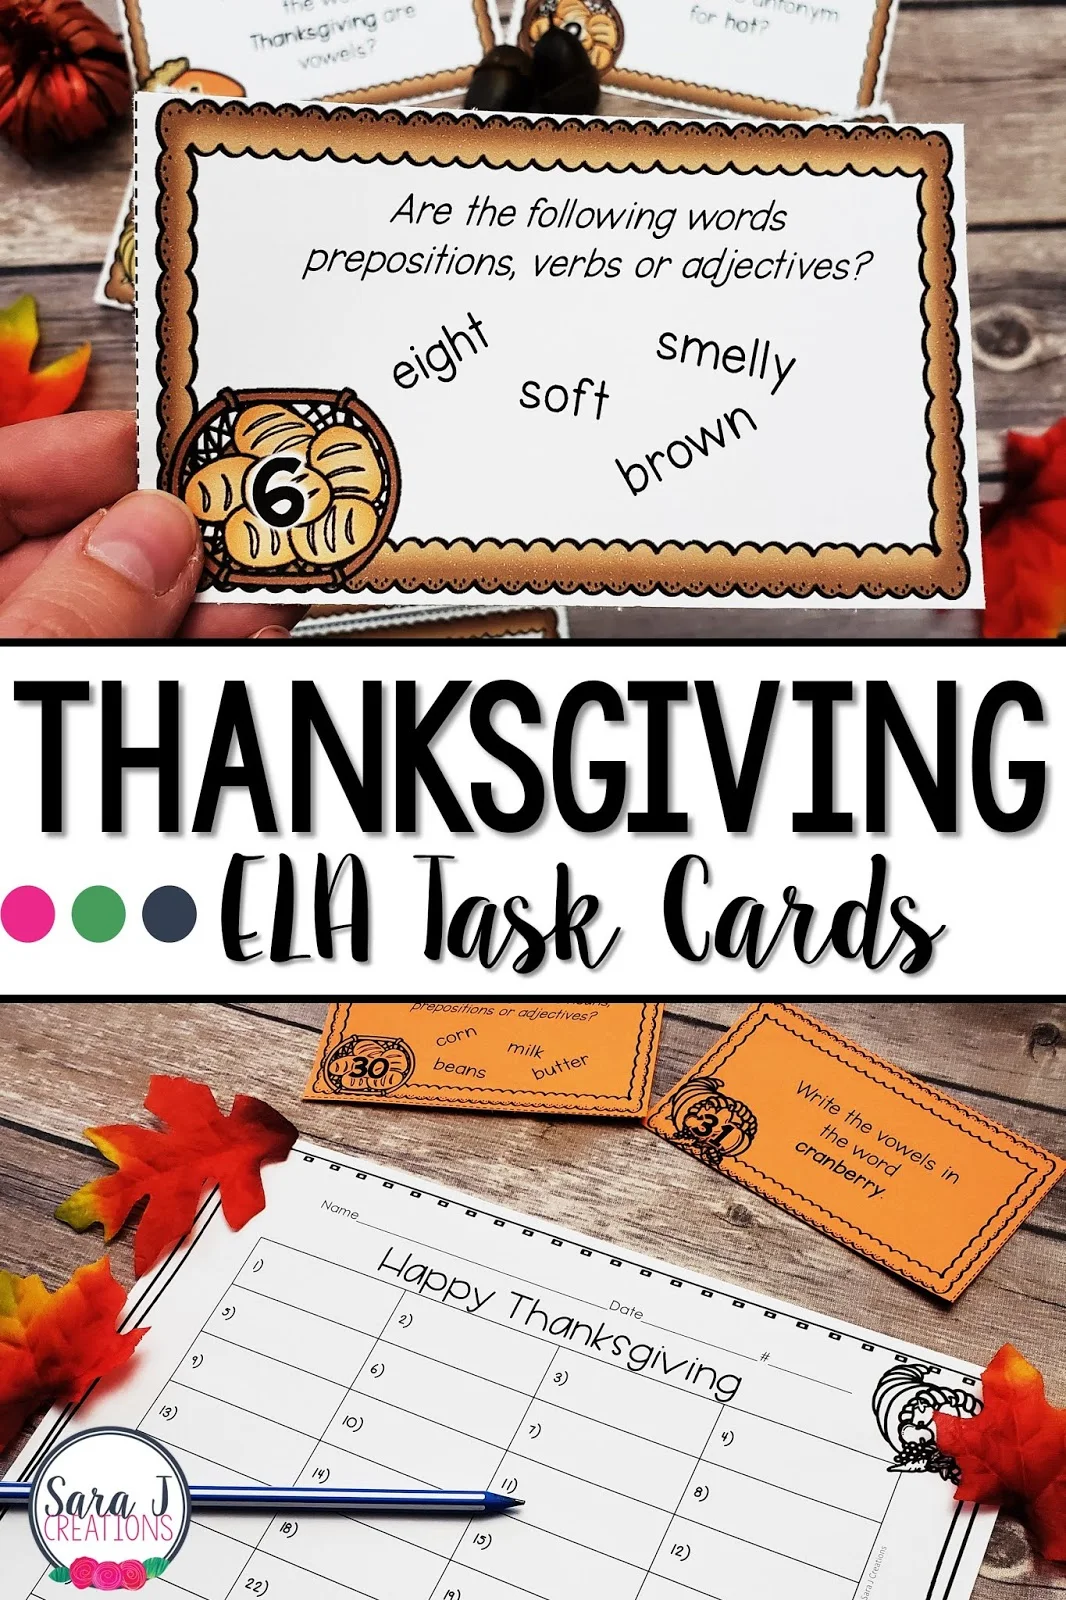 Review parts of speech, punctuation, contractions and more with these Thanksgiving themed ELA task cards. These 32 cards are designed for 2nd grade but could be used with other grade levels too. Also includes recording sheet, answer keys and ideas for use.